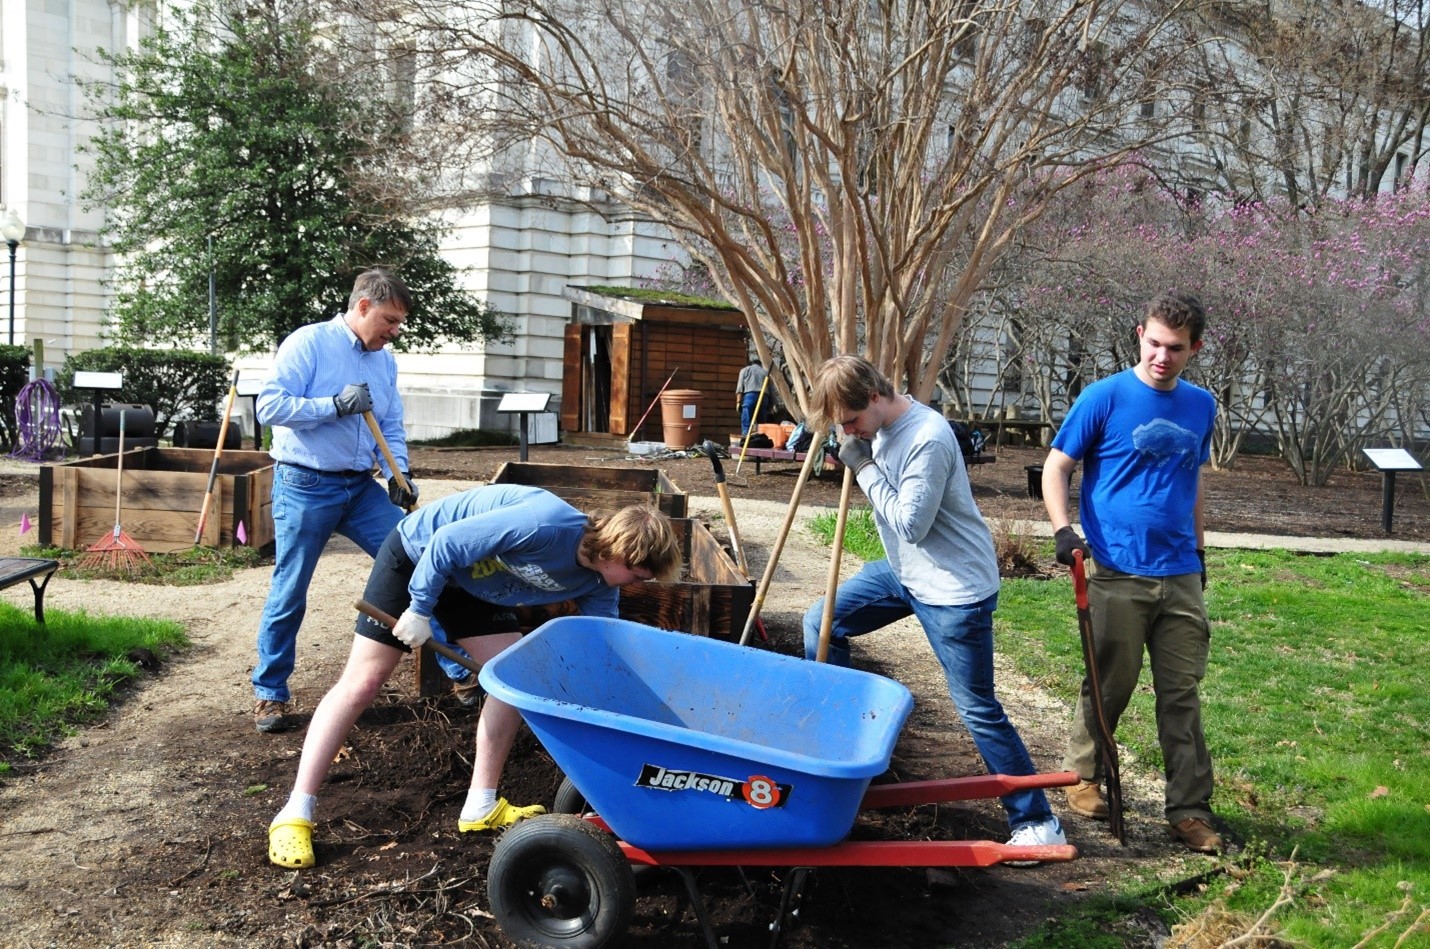 Broadneck High School Students help weed, redistribute soil, and prepare the garden beds for planting in March 2022